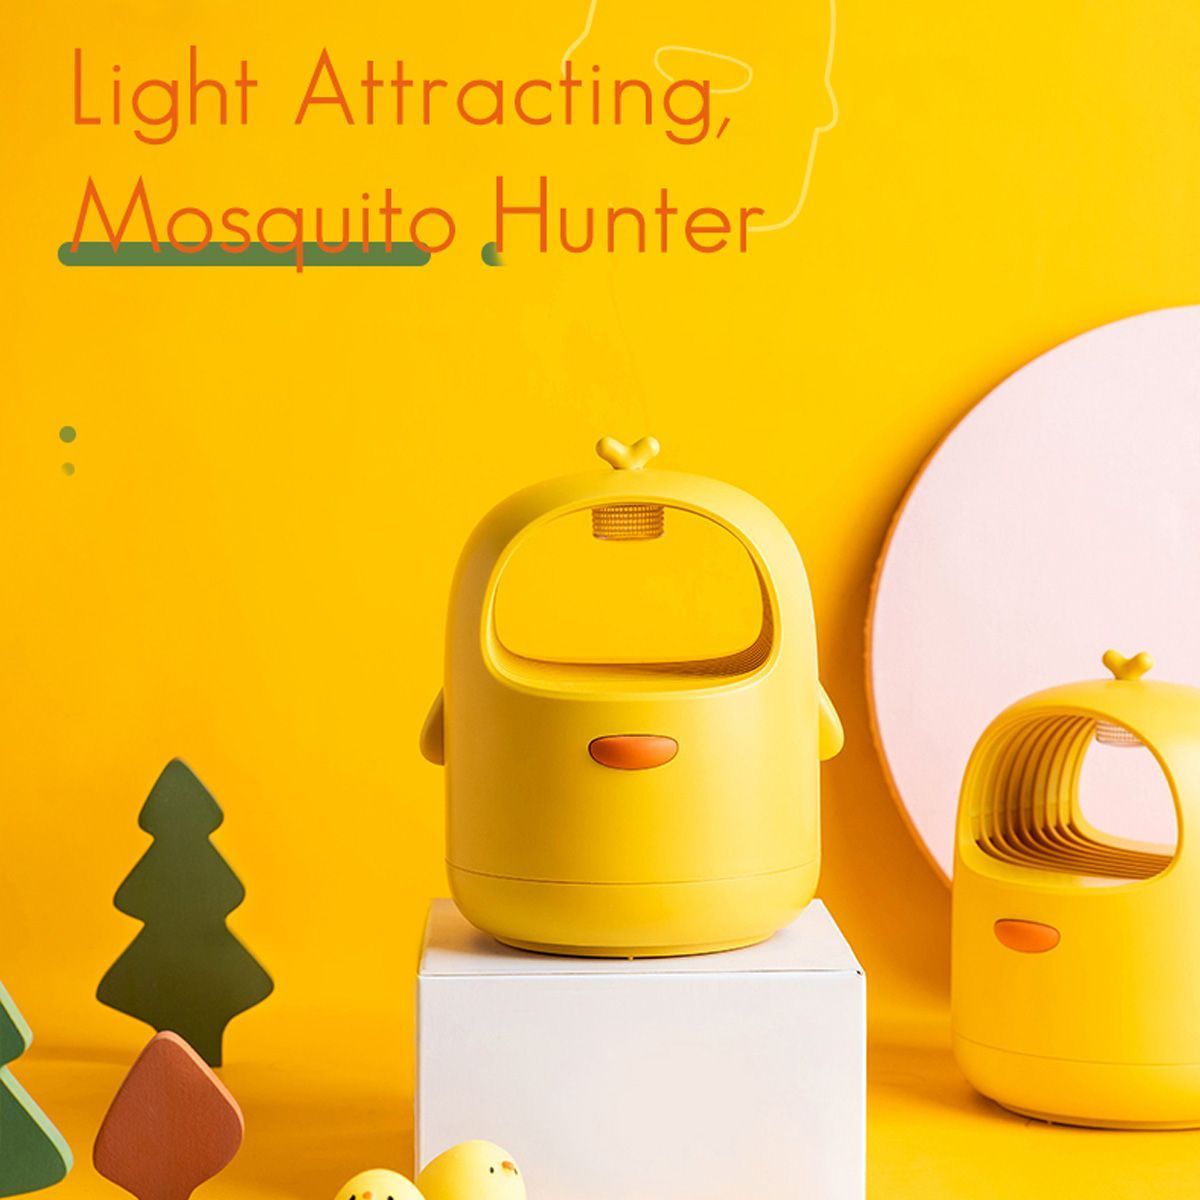 2020-New-USB-Mosquito-Killer-Lamps-Physical-Mosquitos-Control-Zapper-Insect-Killer-Indoor-1708994